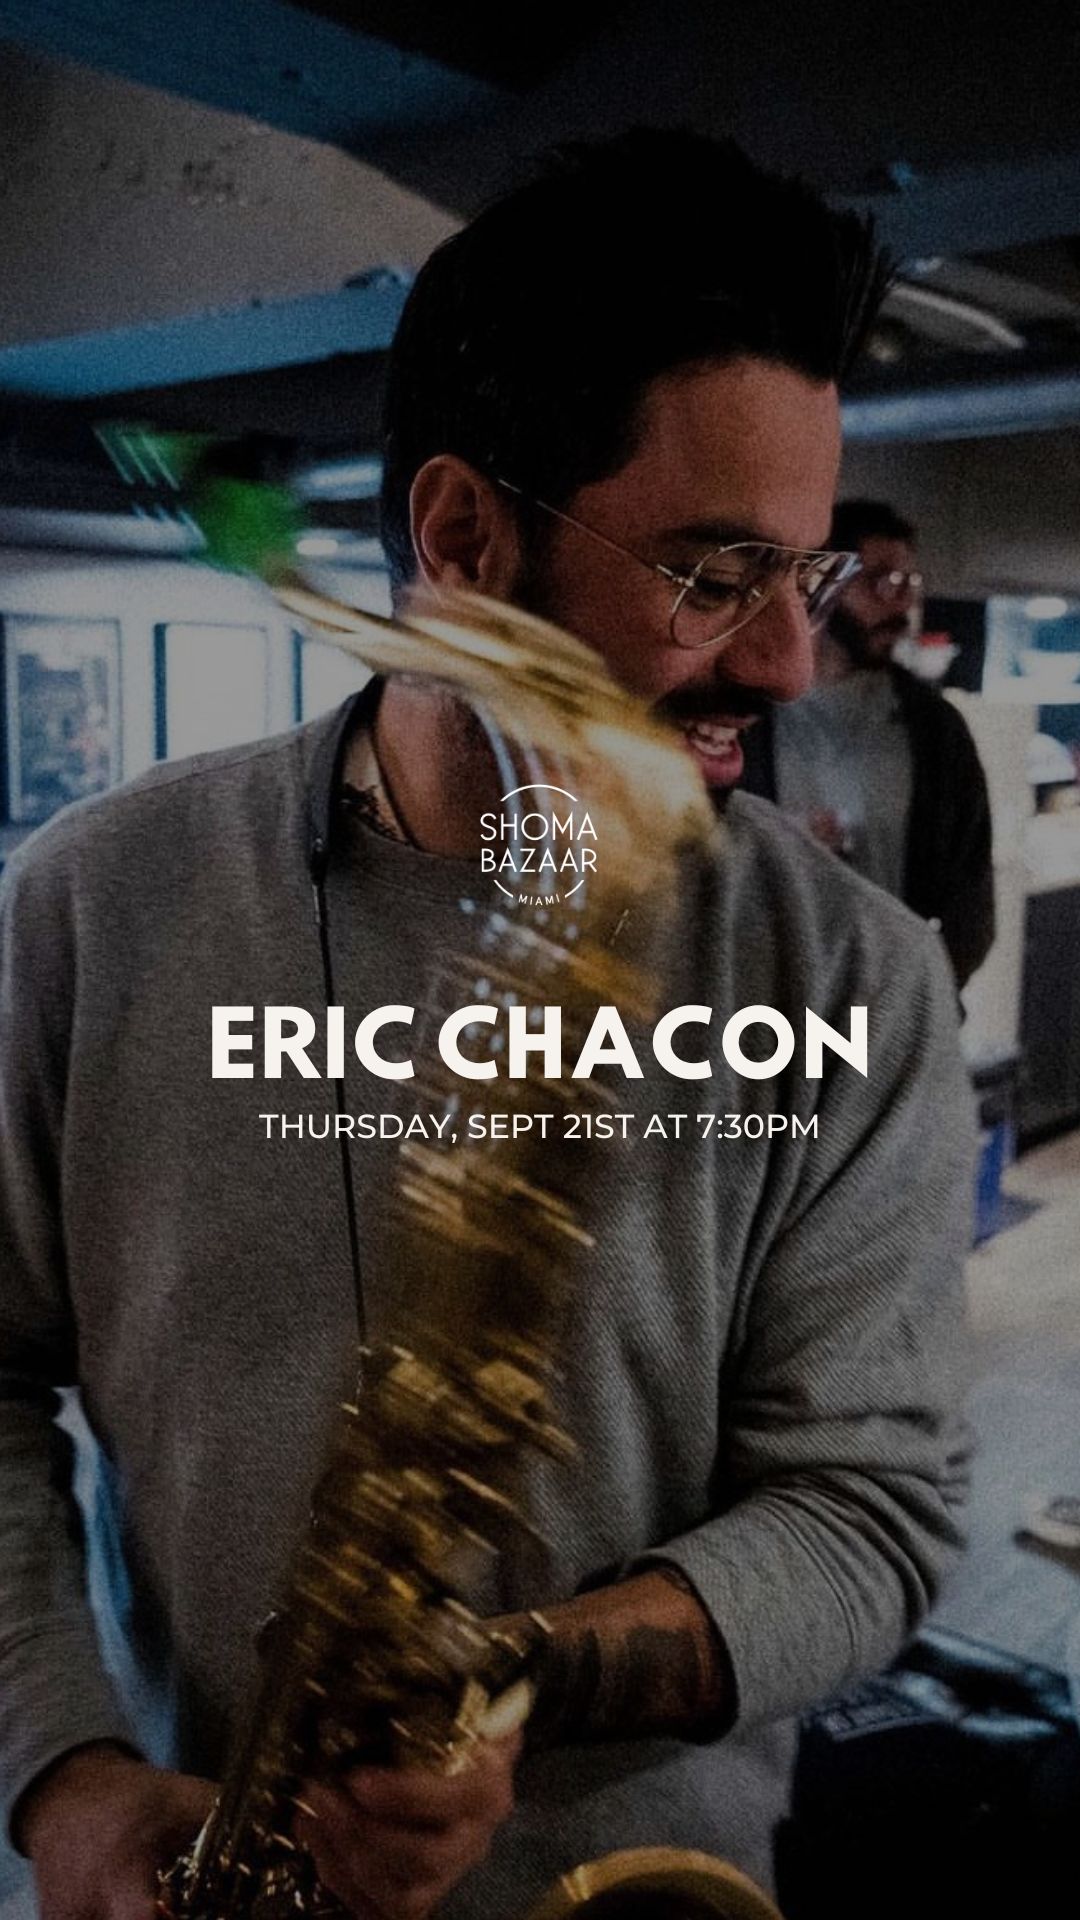 Shoma Bazaar Experience the captivating live saxophone performance by Eric Chacon this Thursday at 7:30 pm.